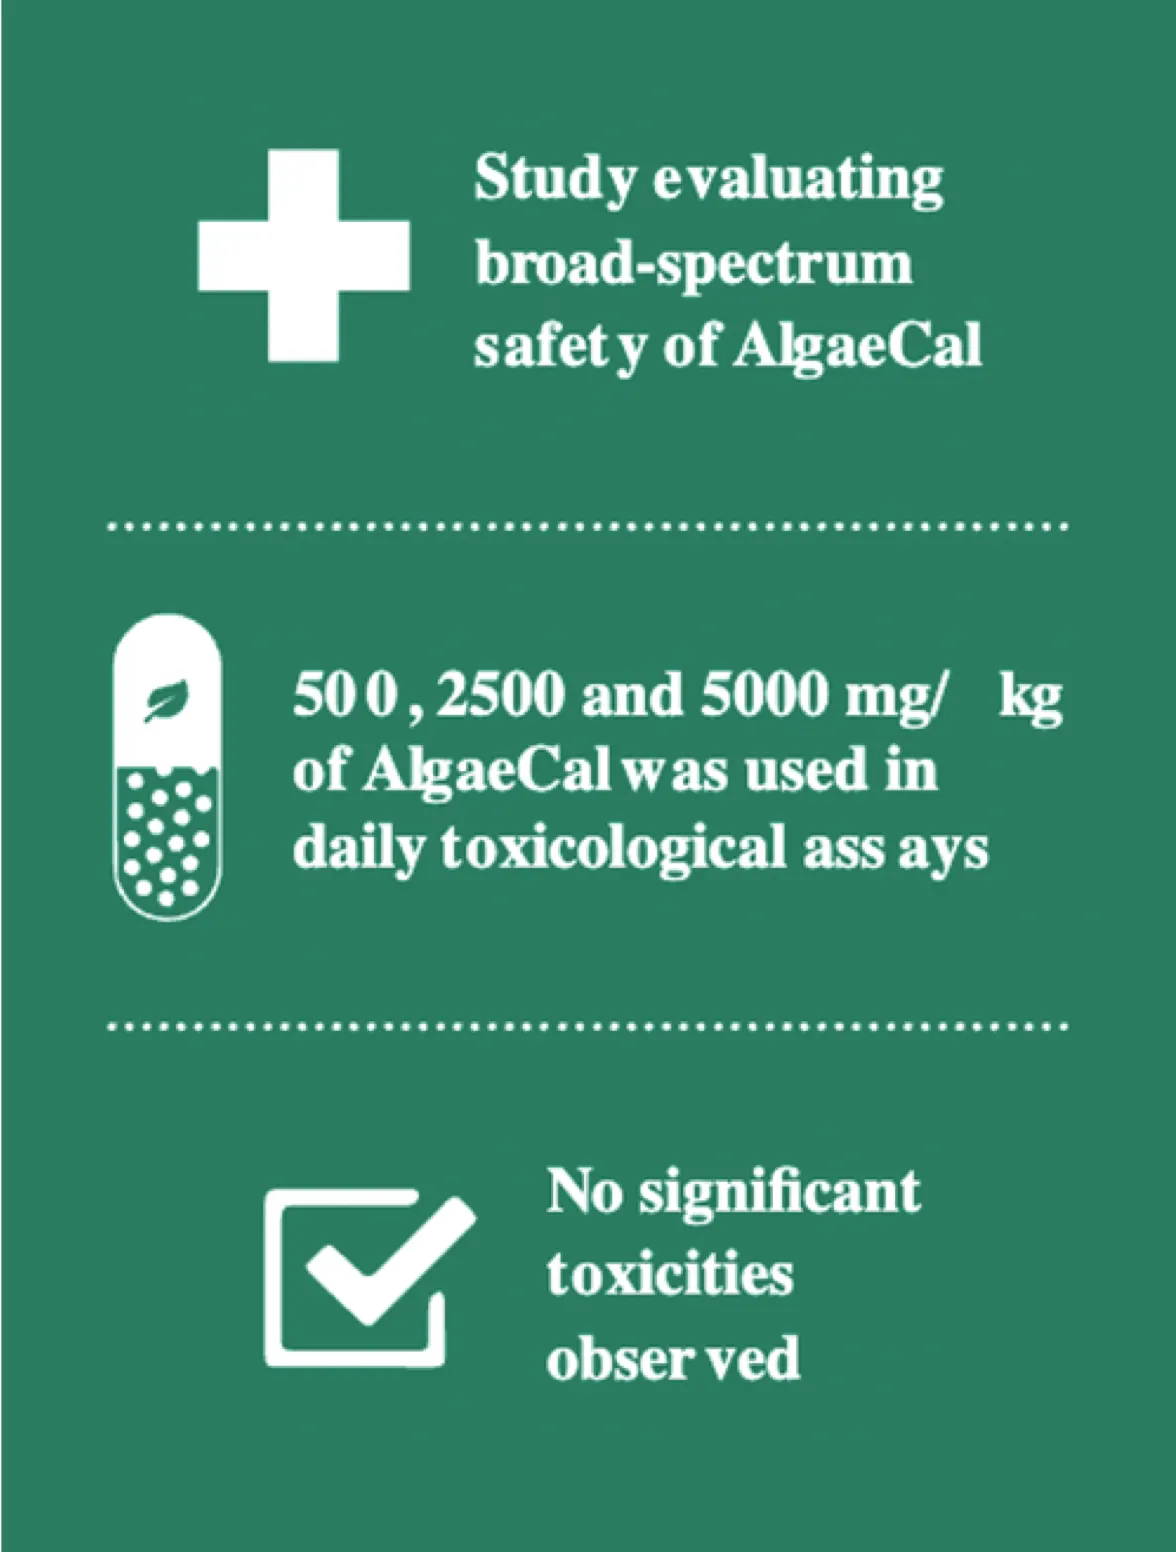 Graphic shows no significant toxicities observed in study evaluating 500, 2500 and 5000 mg/kg of AlgaeCal in daily assay